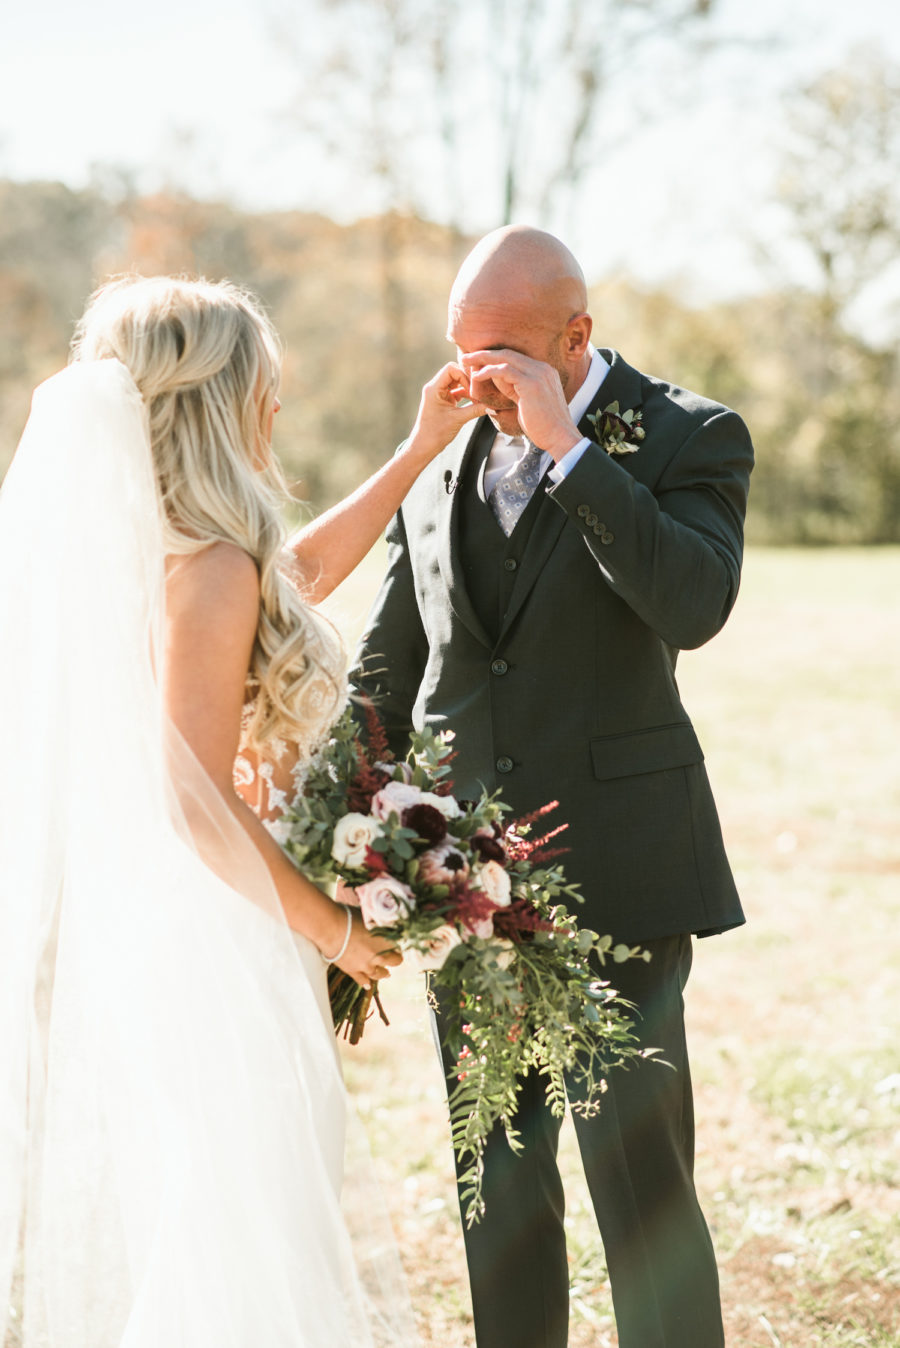 Wedding First Look captured by Shelby Rae Photographs on Nashville Bride Guide